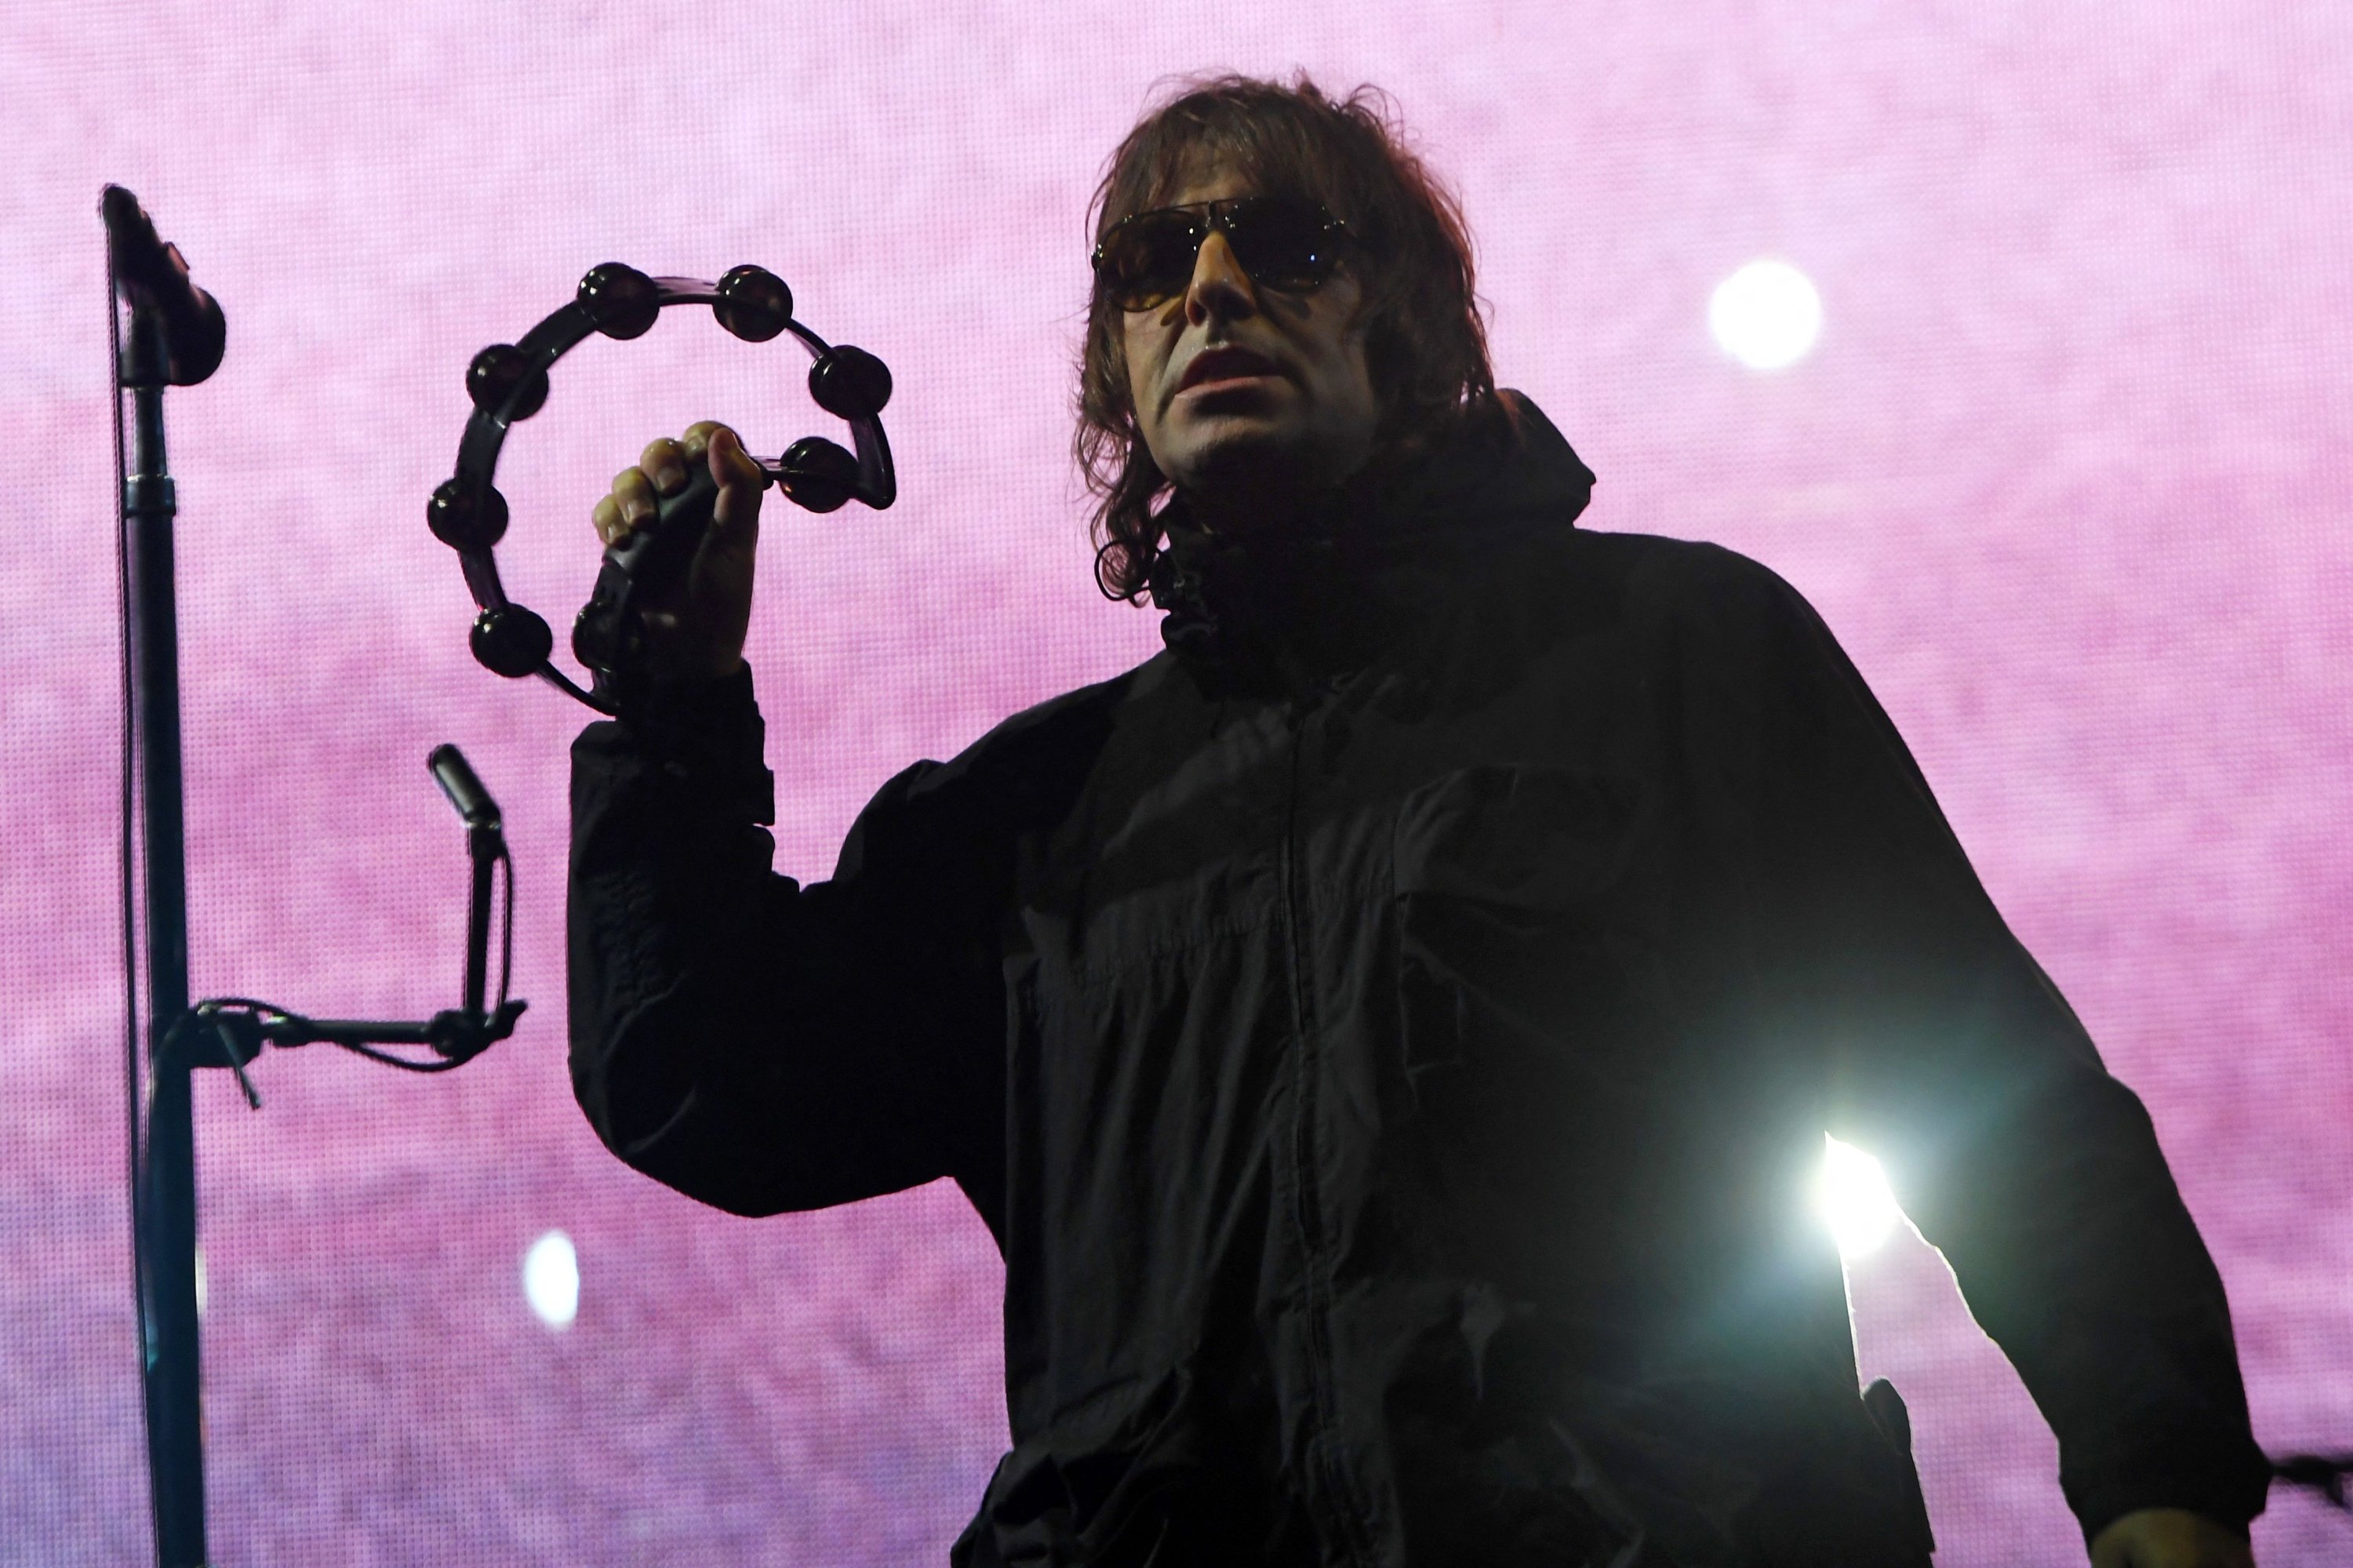 Liam Gallagher headlines the main stage during the TRNSMT Festival on Glasgow Green in the center of Glasgow, Scotland on Sept. 11, 2021. (AFP Photo)